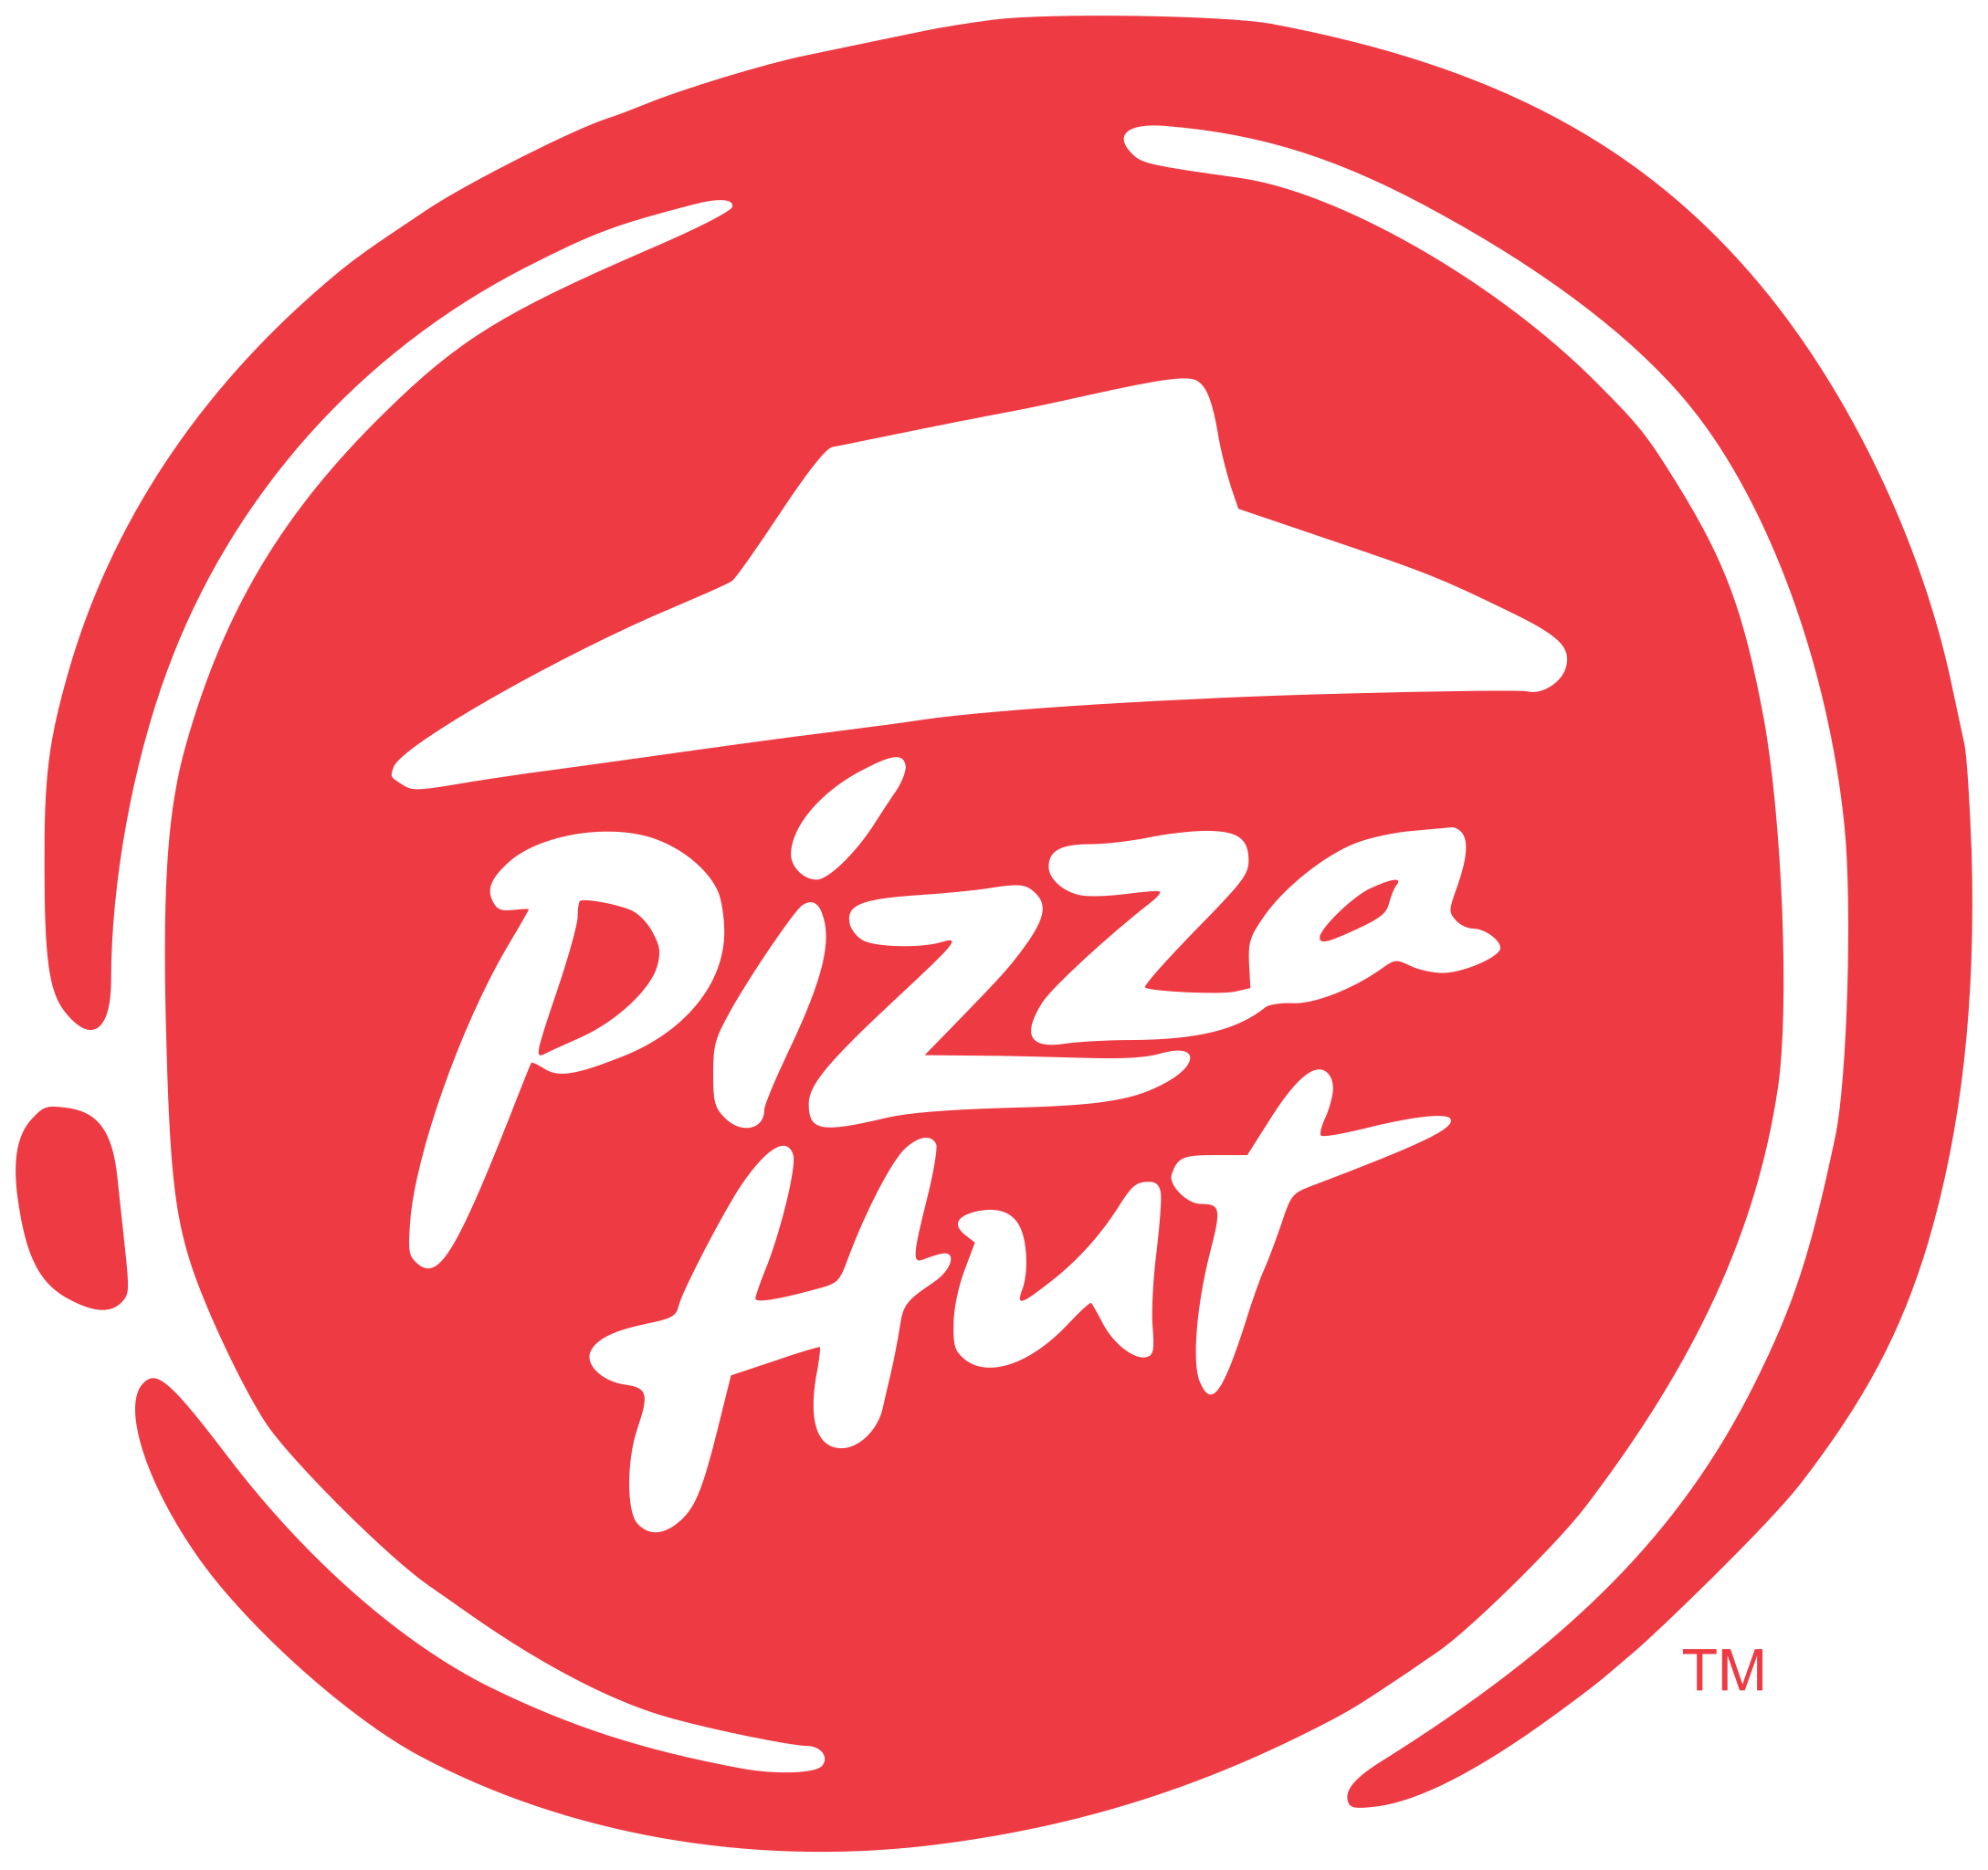 Pizza Hut logo with white background.